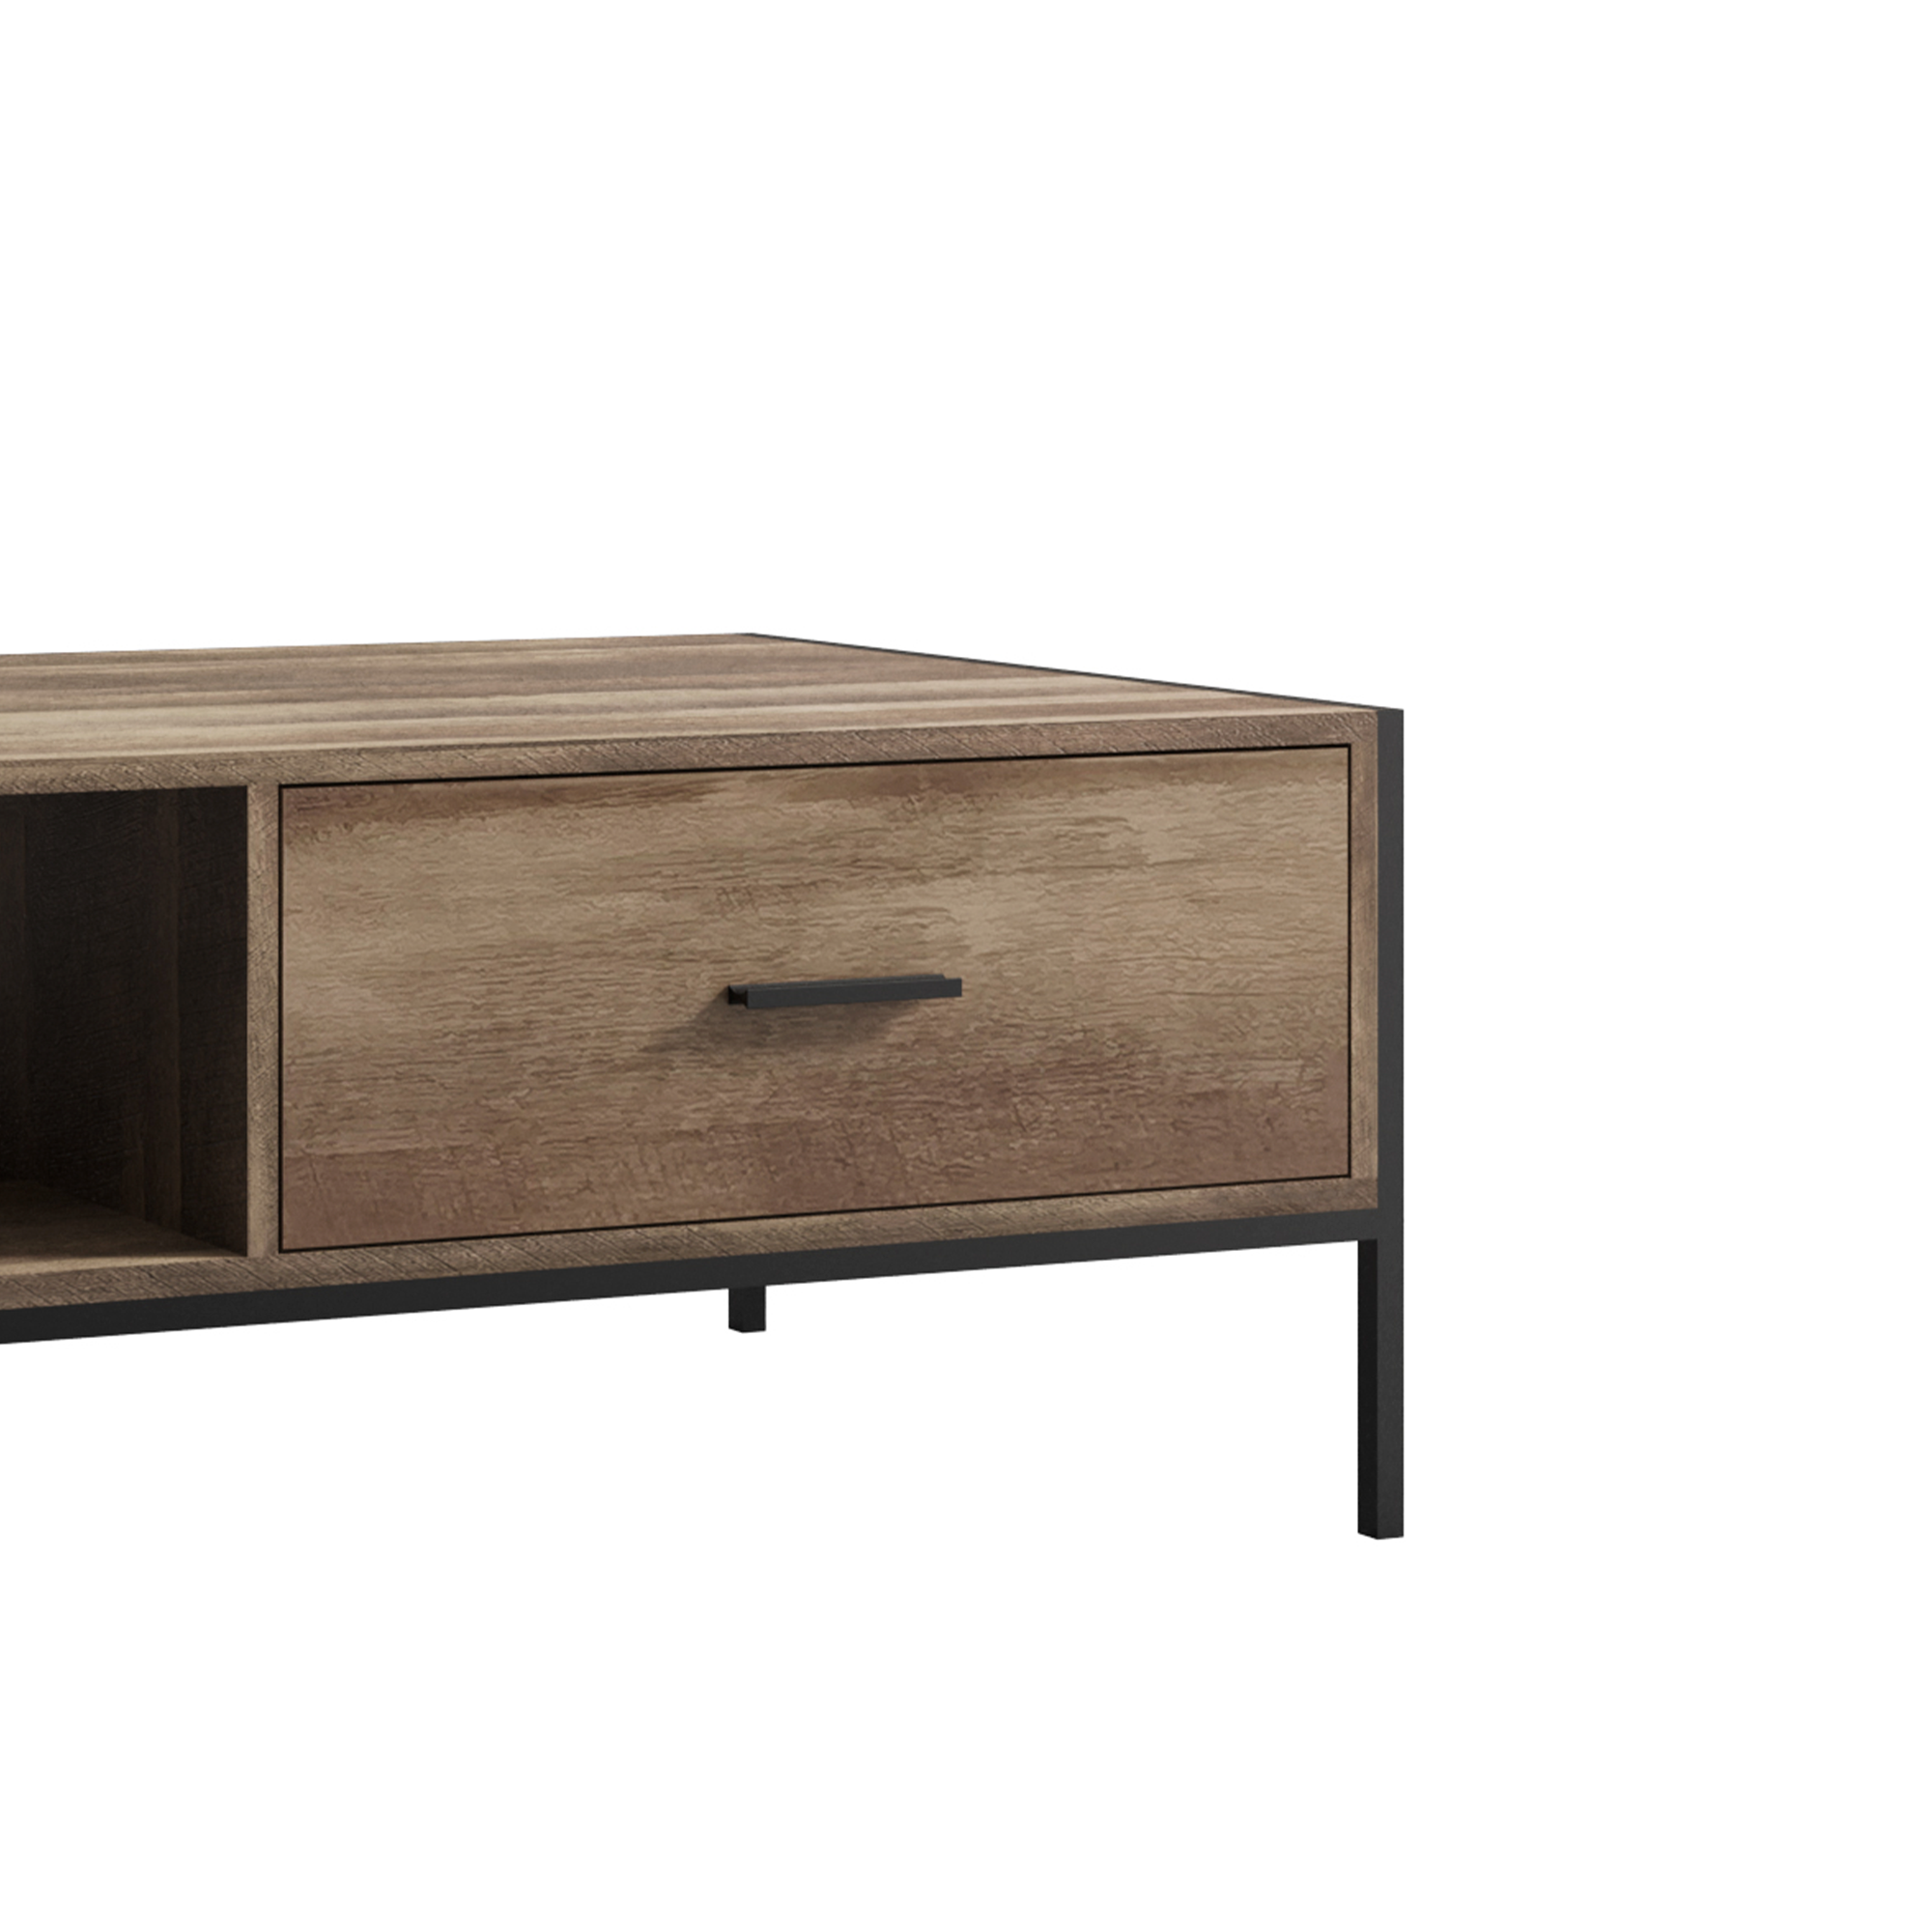 Modern Coffee Table With Drawers And Storage Shelves